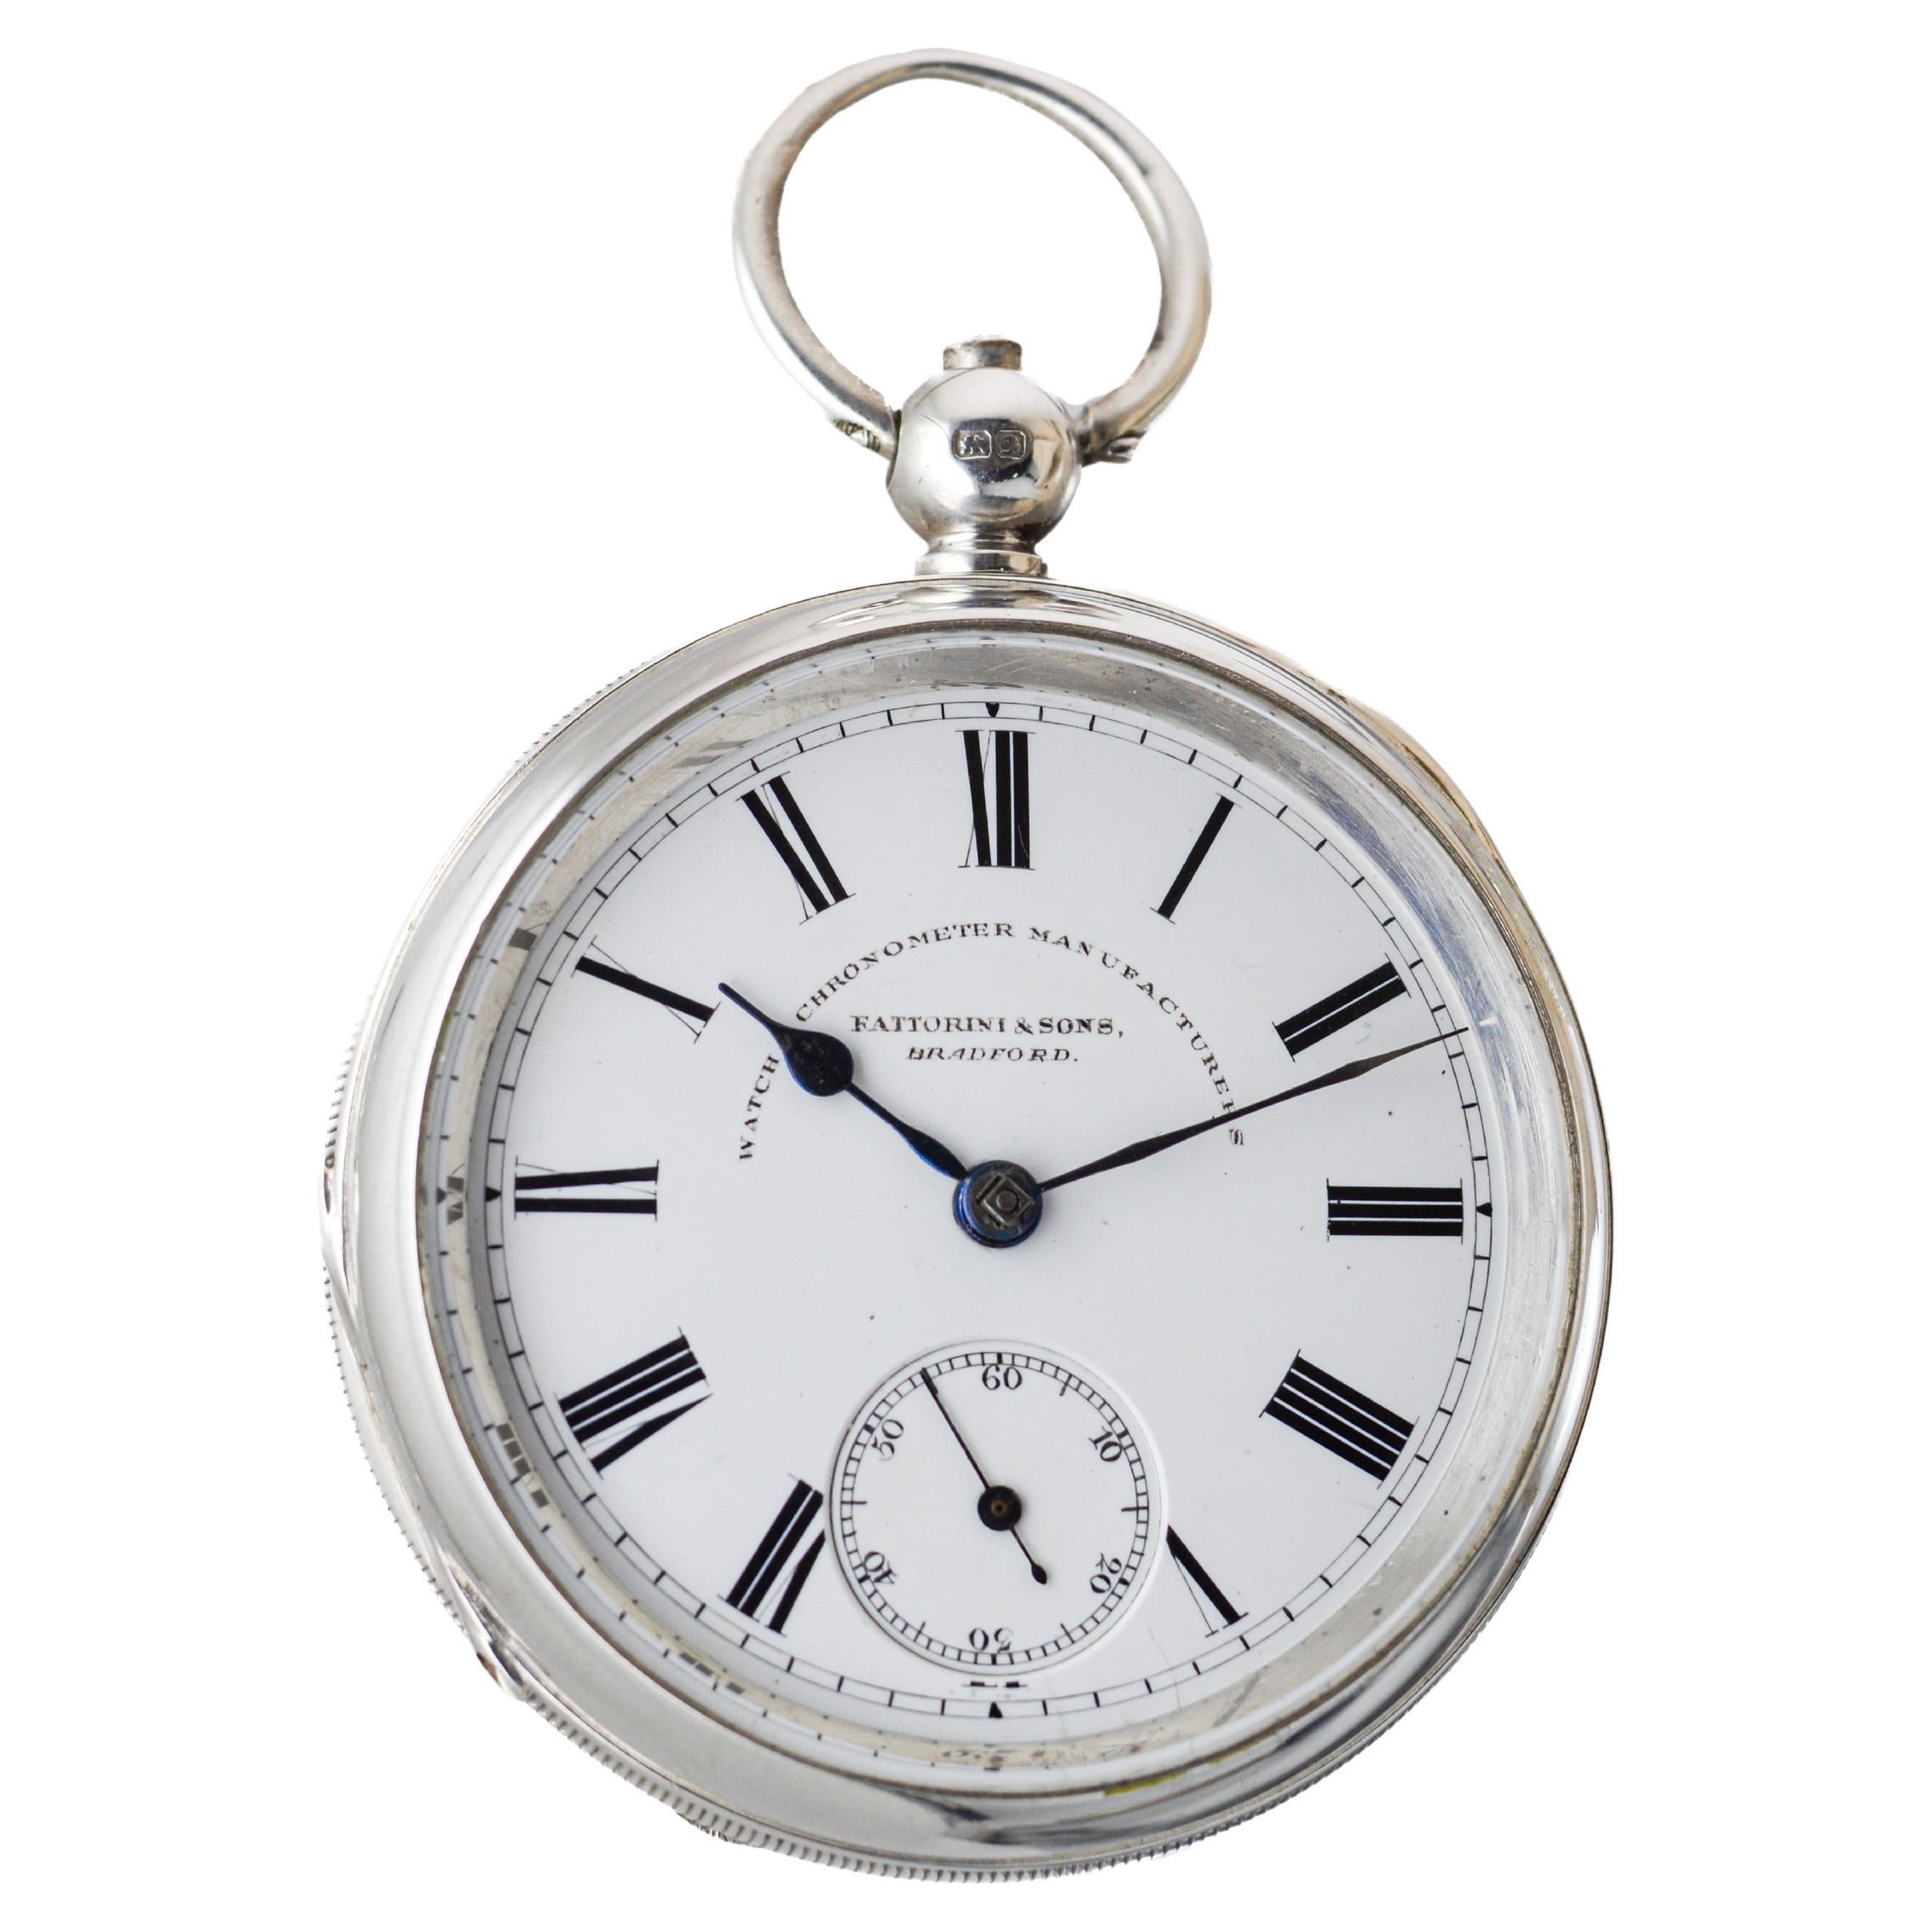 Art Deco Fattorini & Sons Silver Keywind with Original Kiln Fired Enamel Dial from 1880's For Sale